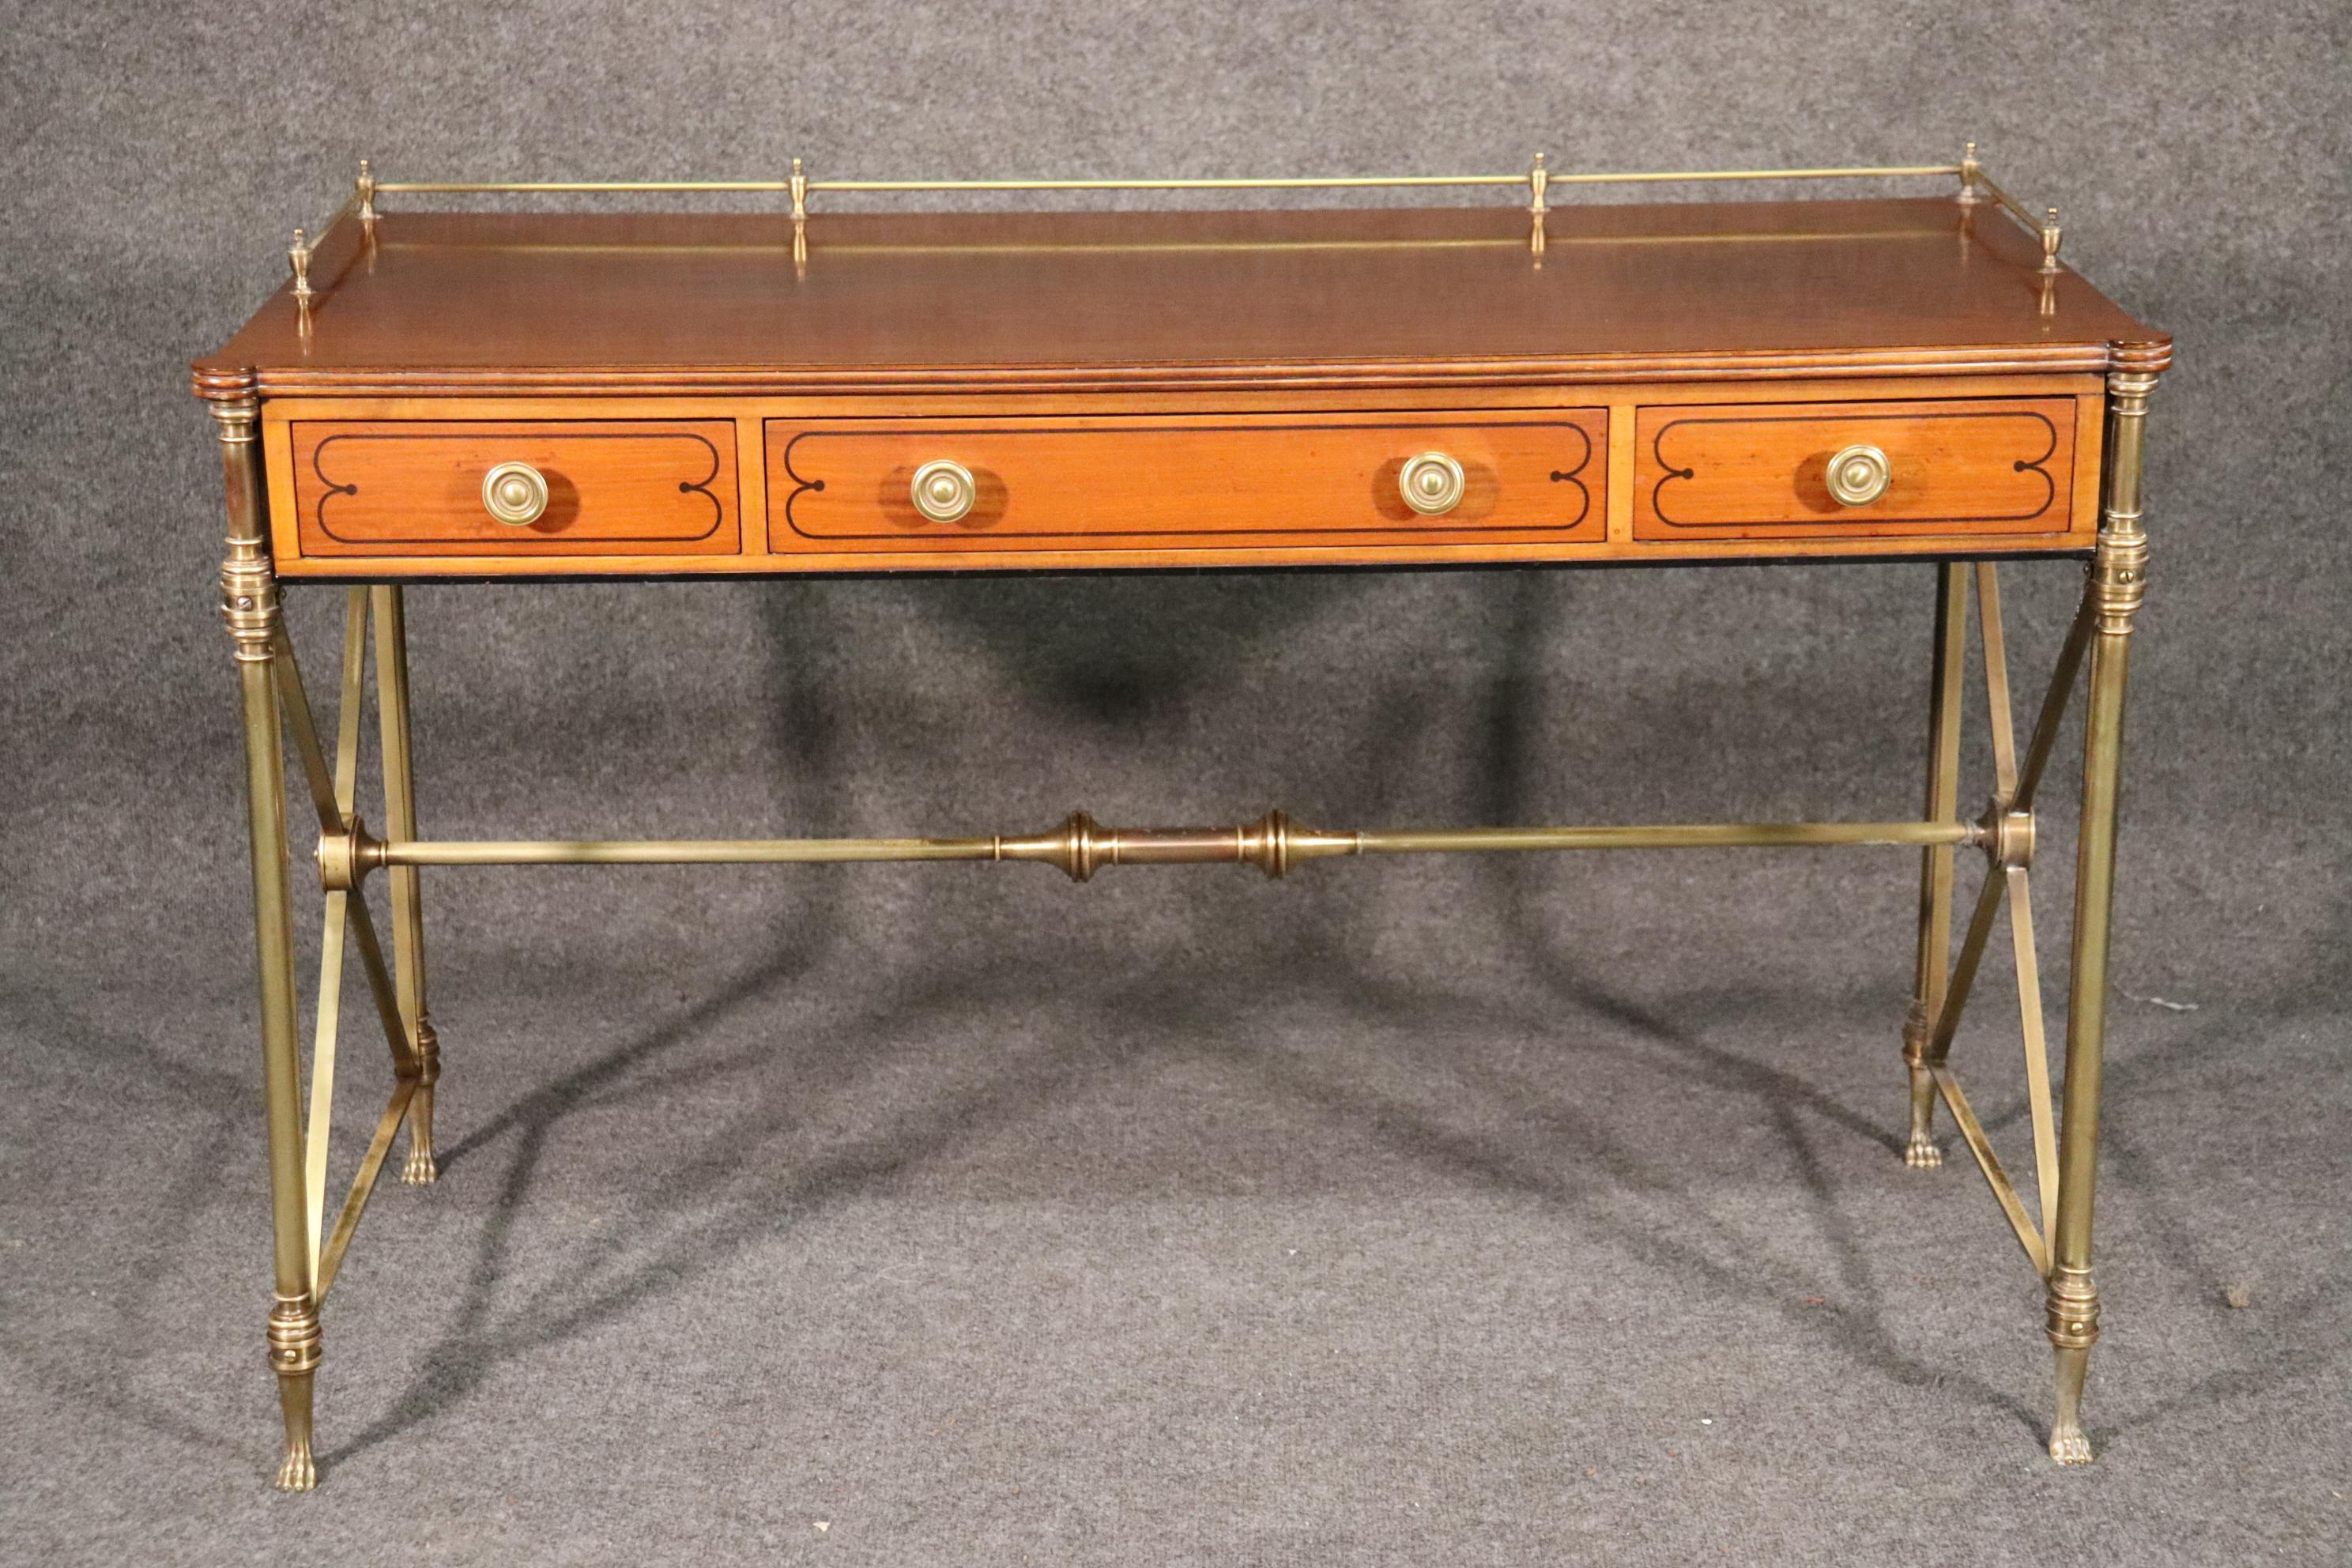 This is a very rare Kittinger of Buffalo, NY directoire style desk. The desk is in good condition with beautiful polished brass and a satinwood case. The case is inlaid in ebony and is in good vintage condition. The desk measures 47 wide x 22 deep x